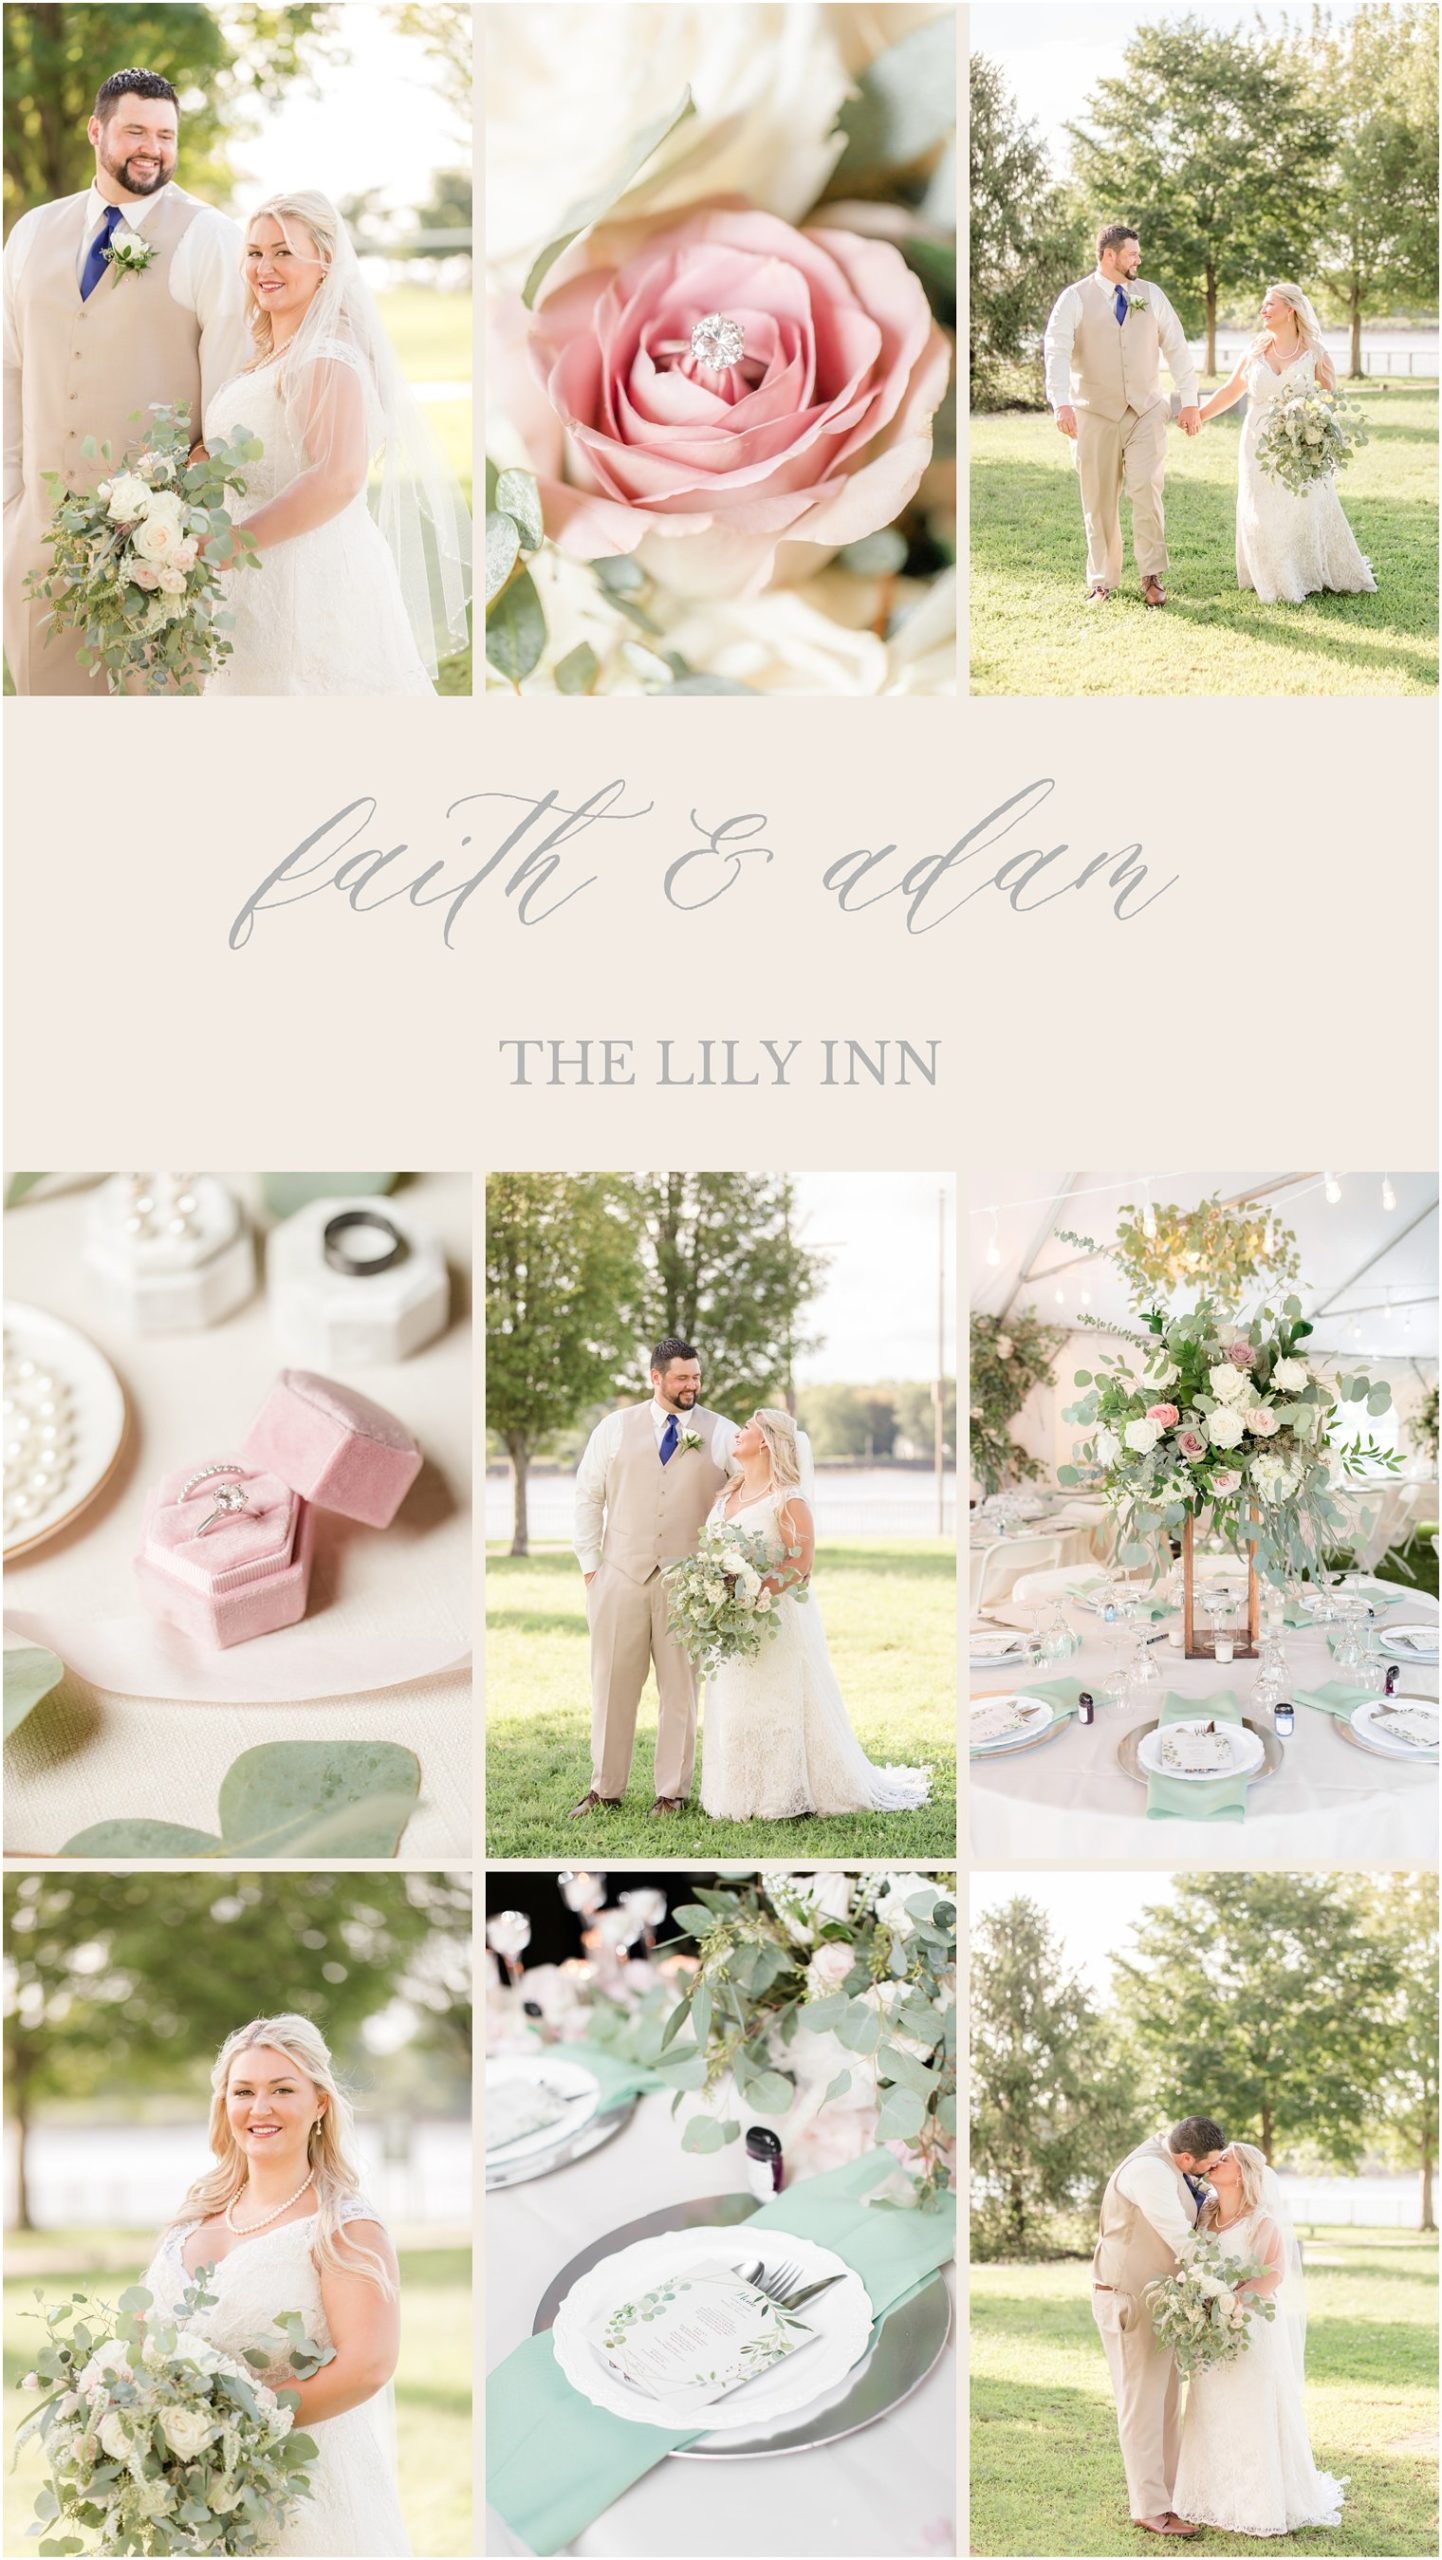 Micro wedding at The Lily Inn